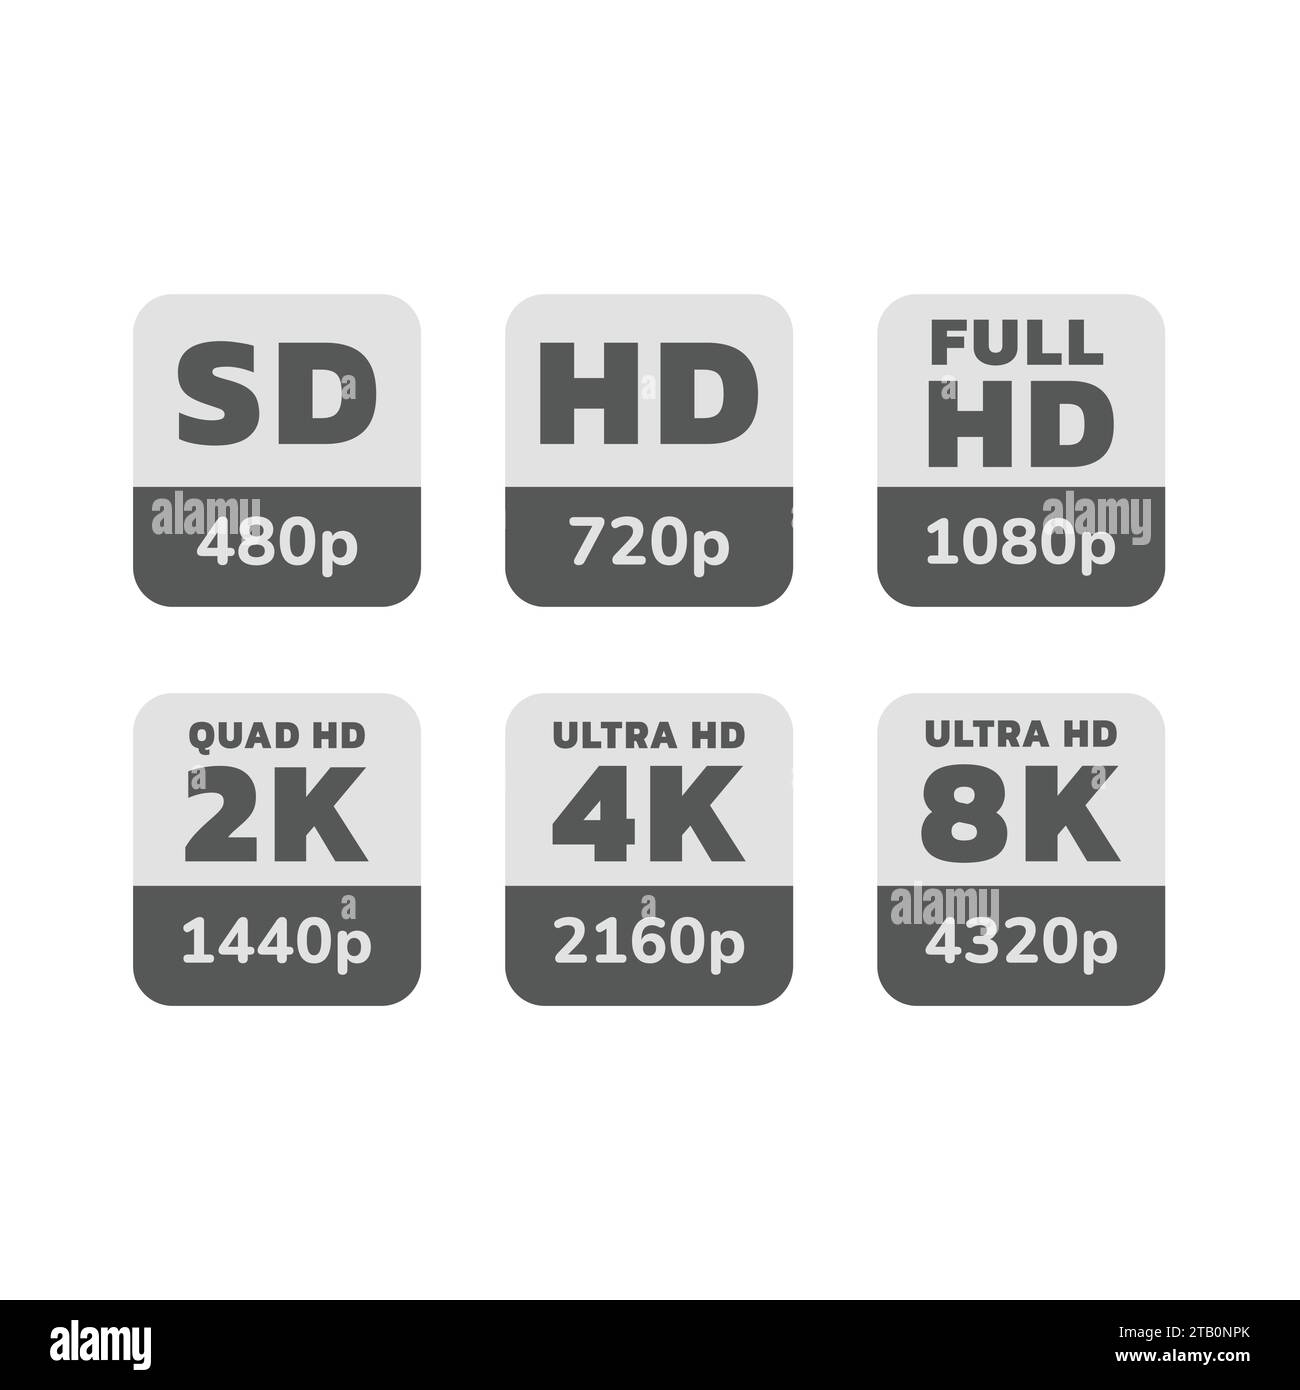 Full and ultra HD screen resolutions label sticker set. 4K, 8K and 1080p stickers and labels. Stock Vector